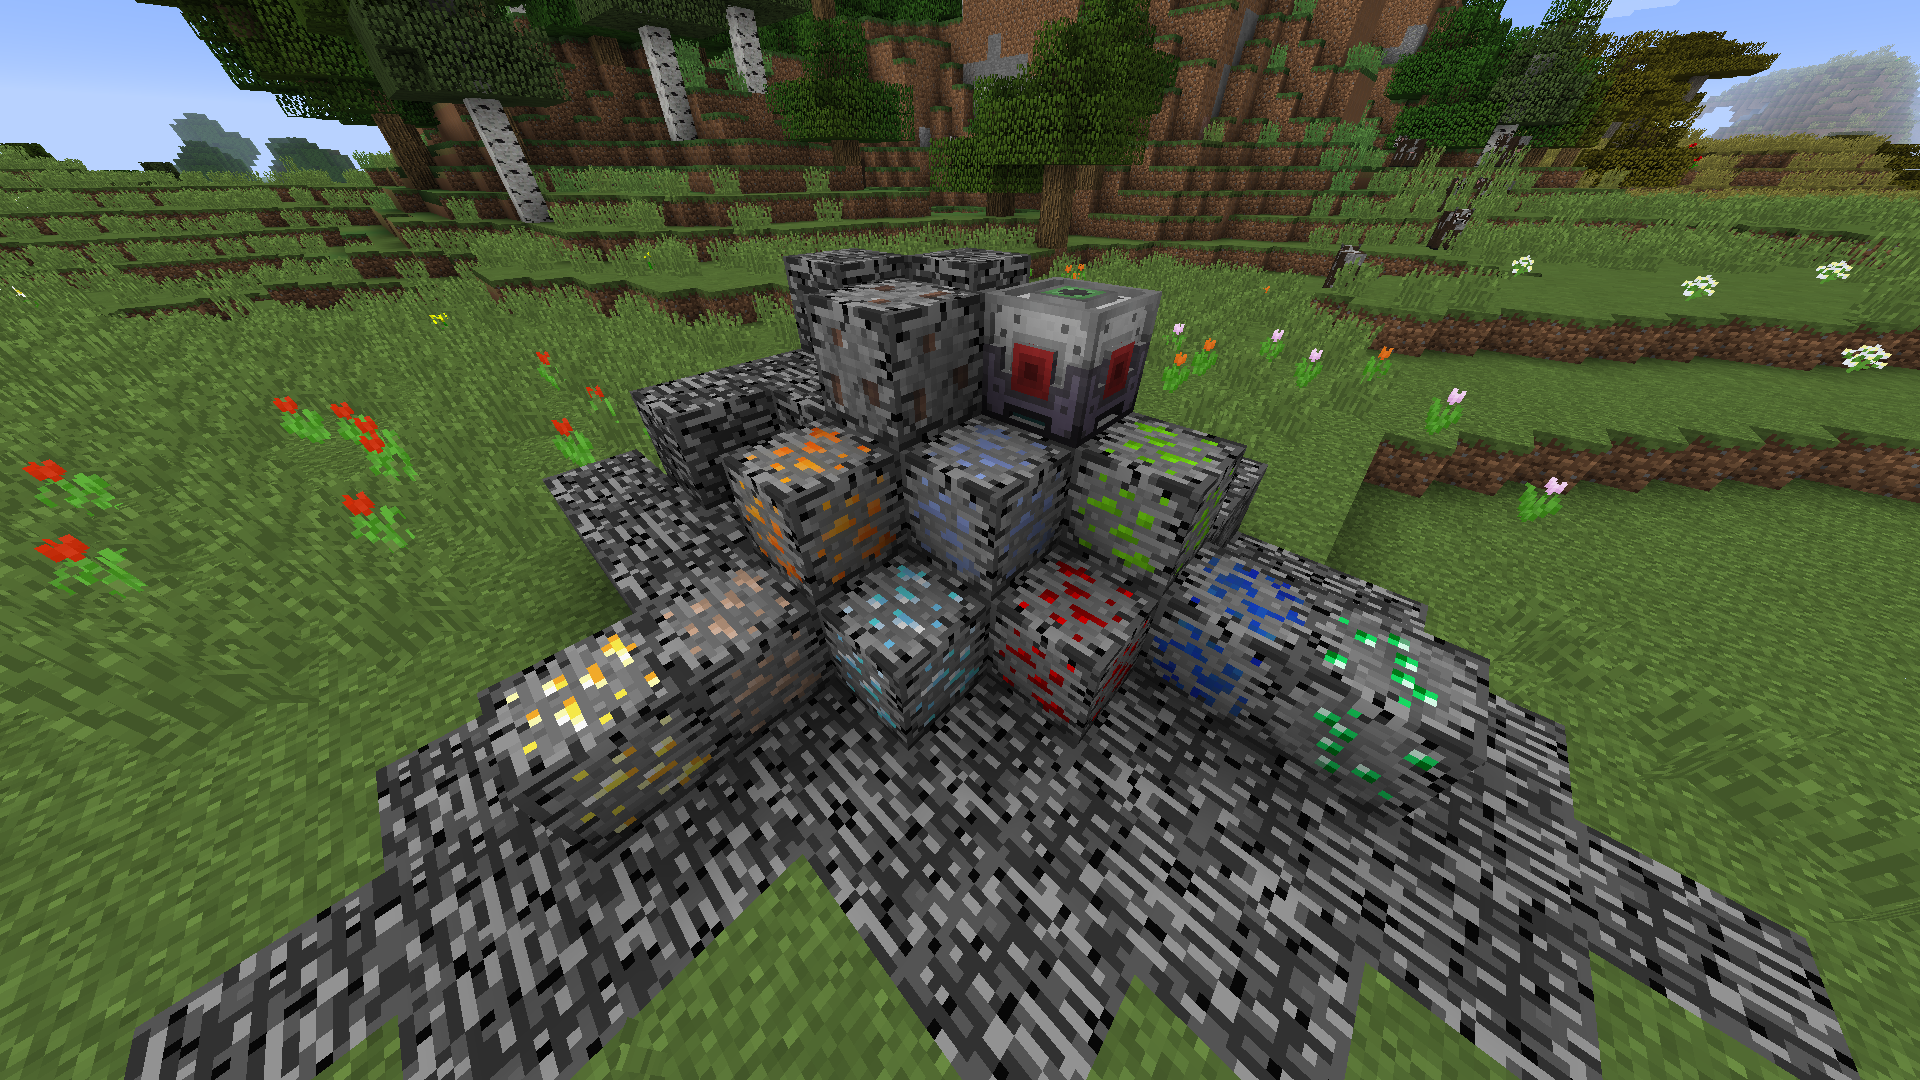 Various ores embedded in bedrock, as well as the bedrock miner.